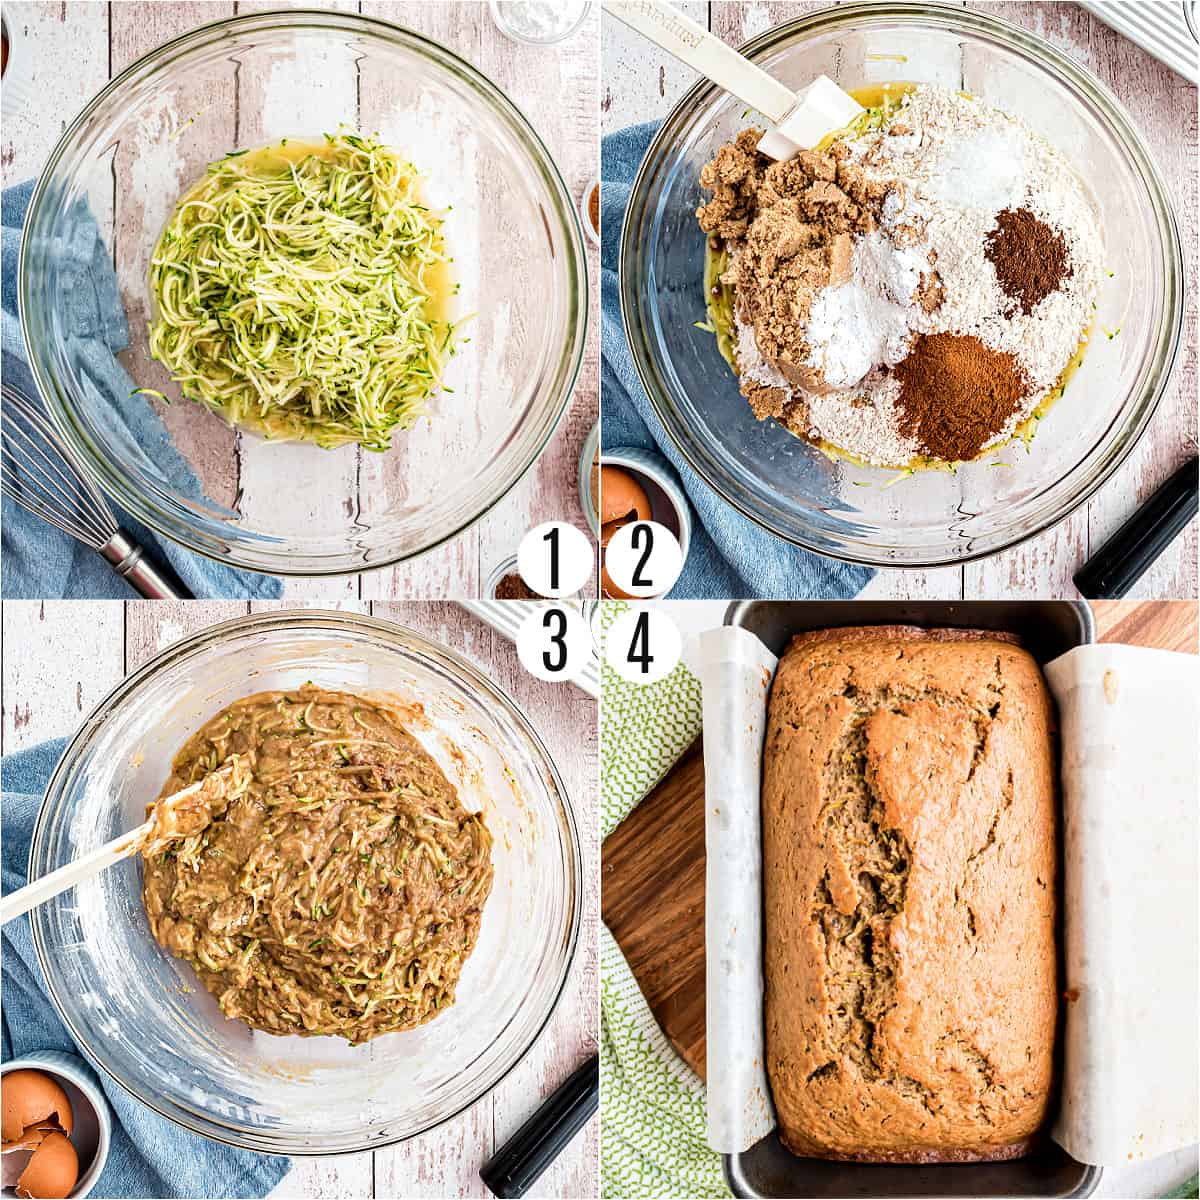 Step by step photos showing how to make zucchini bread.